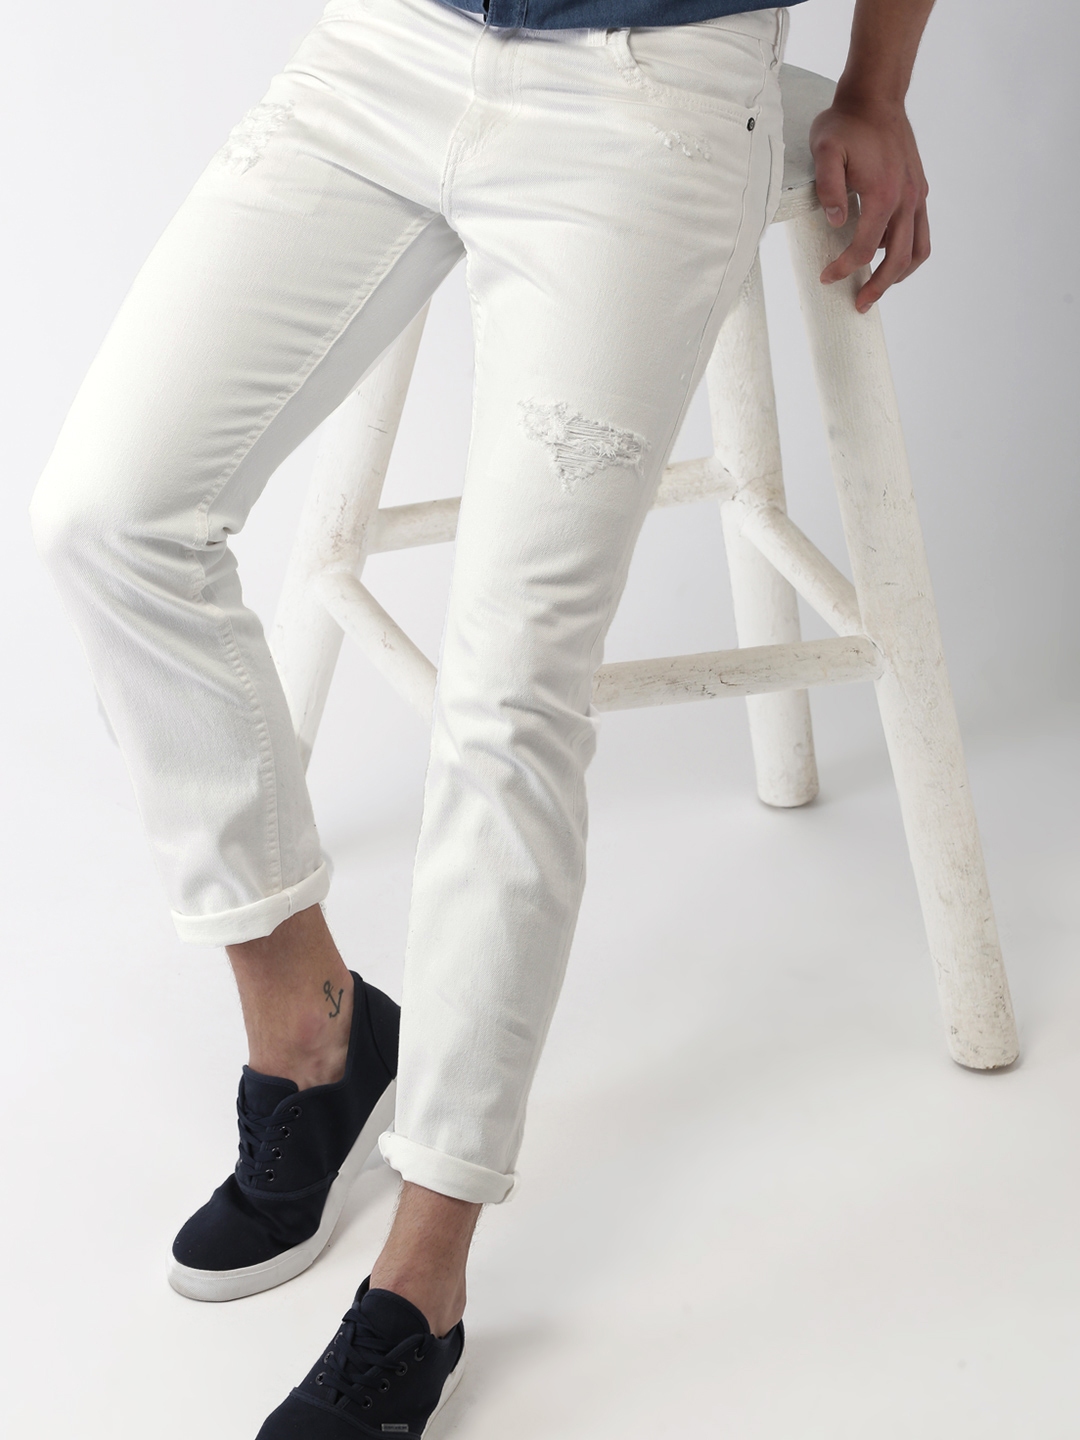 white stretchable jeans